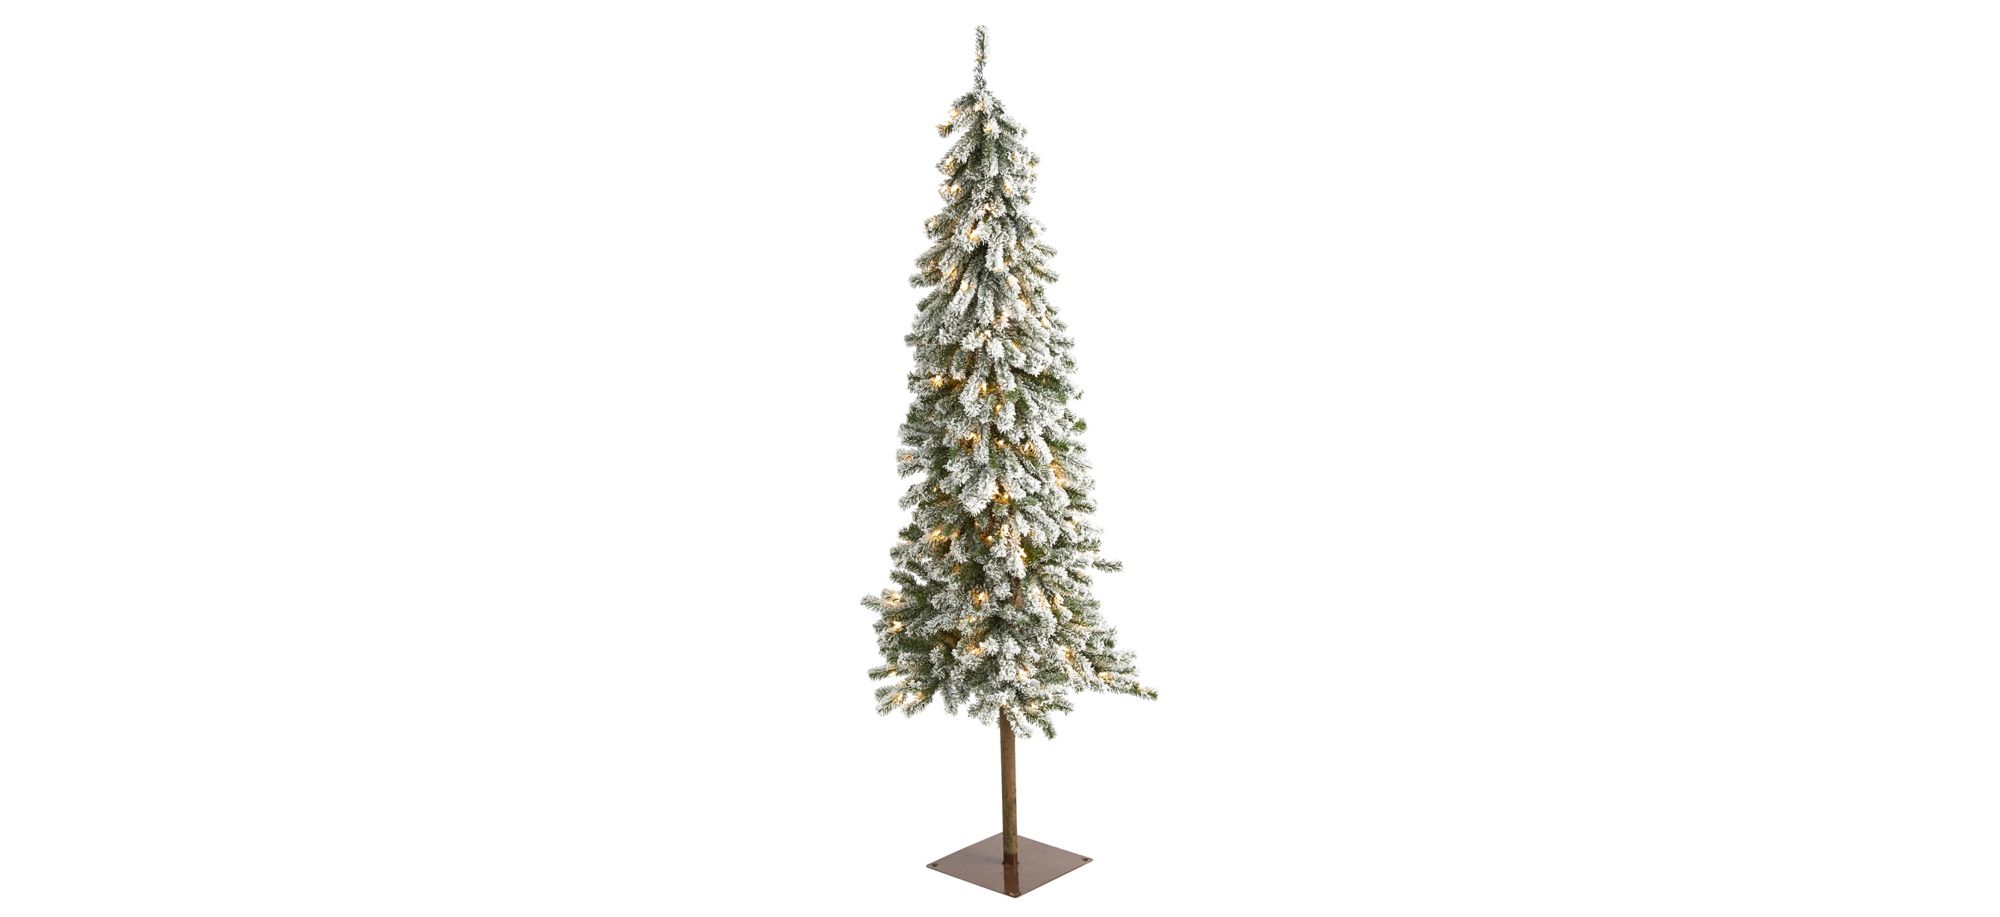 6ft. Pre-Lit Flocked Alpine Artificial Christmas Tree in Green by Bellanest